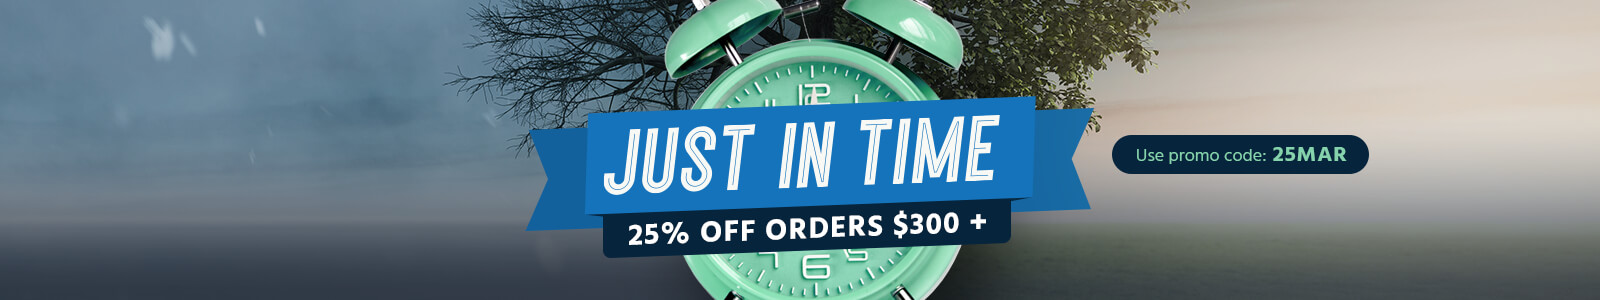 Just In Time! 25% OFF Orders $300 + Use promo code: 25MAR, Shop Now> 